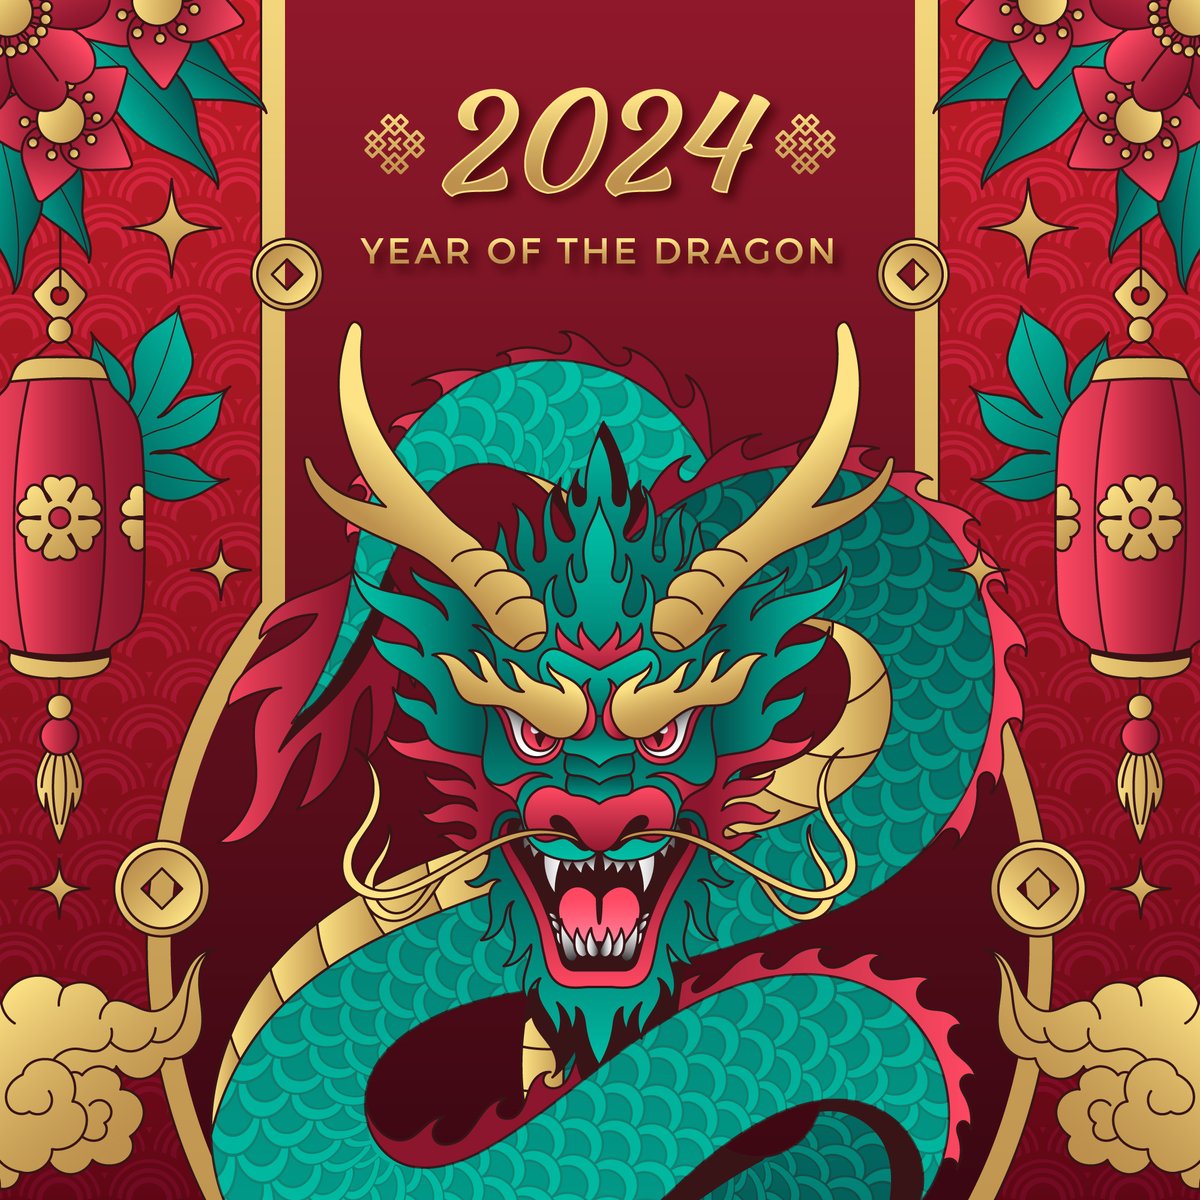 It's officially the Chinese Year of the Dragon 🐉! Celebrate with 25% off sitewide with code LEAPYEAR! rb.gy/jq220b #chinesenewyear2024 #cannabiscommunity #cannabisculture #yearofthedragon #yearofthedragon2024